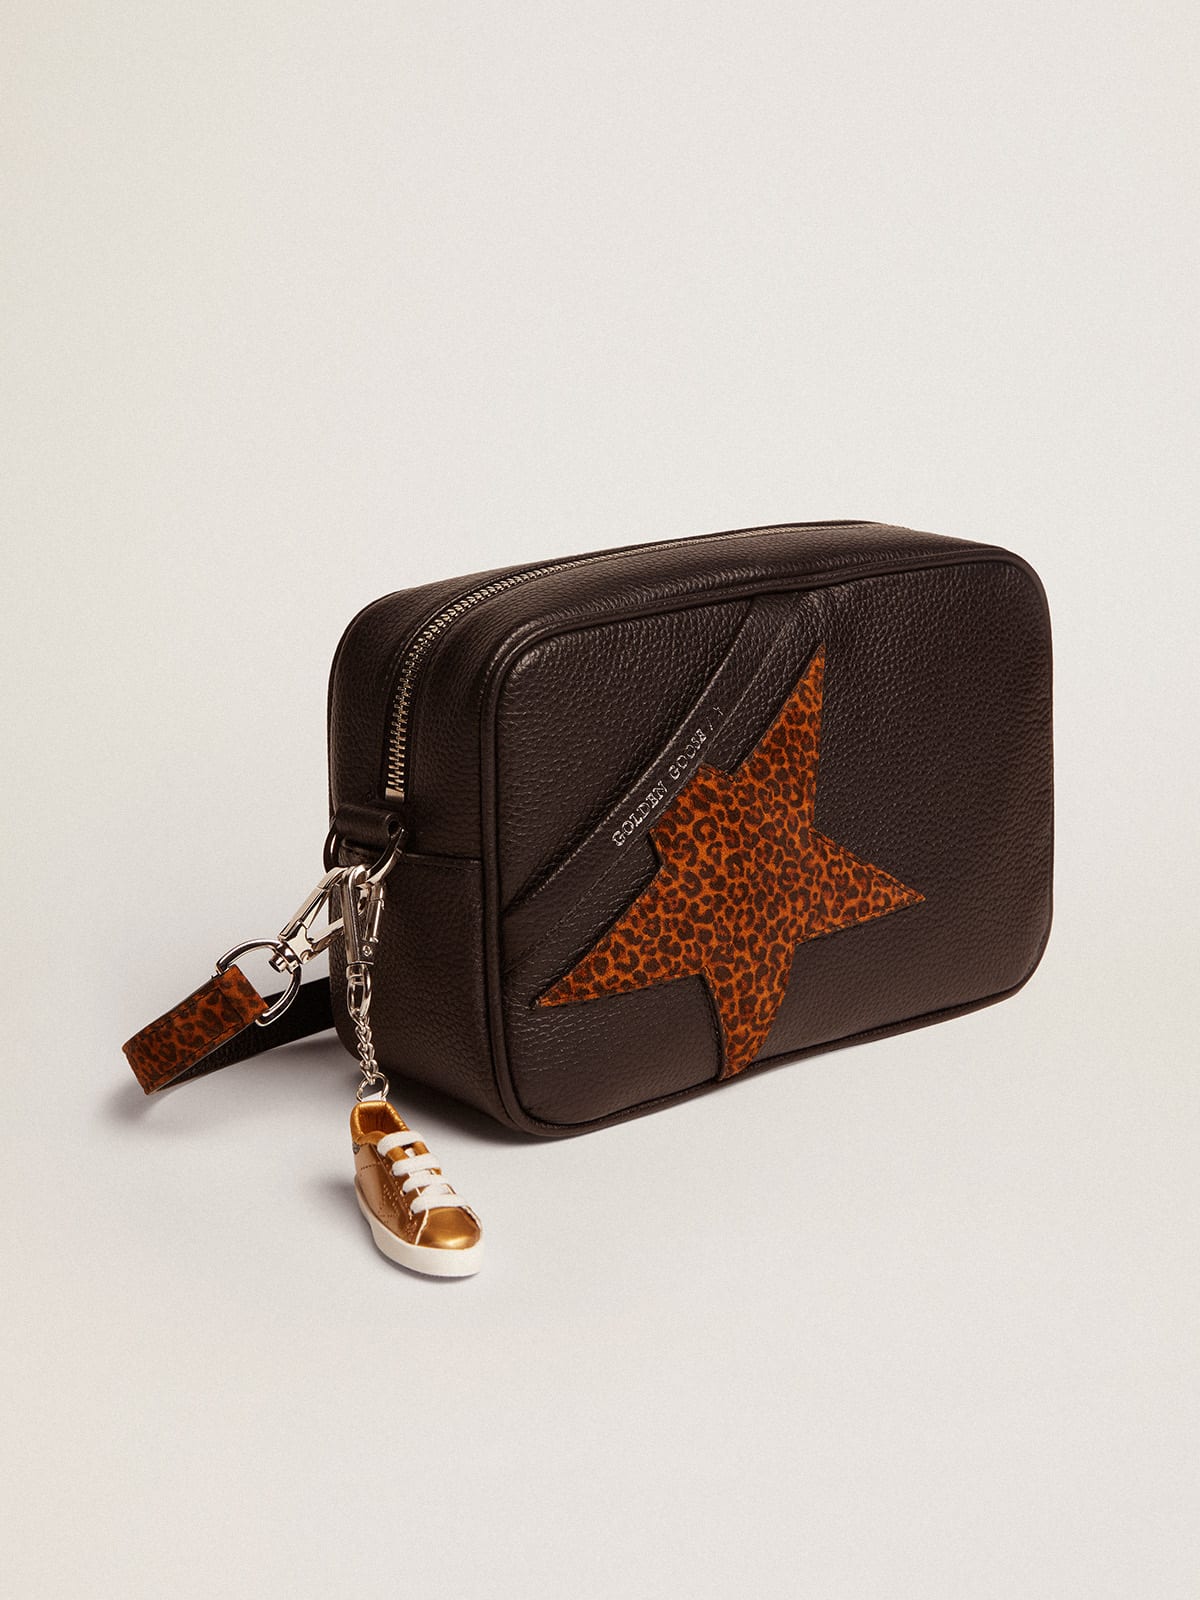 Golden Goose - Star Bag in black leather with leopard-print suede star in 